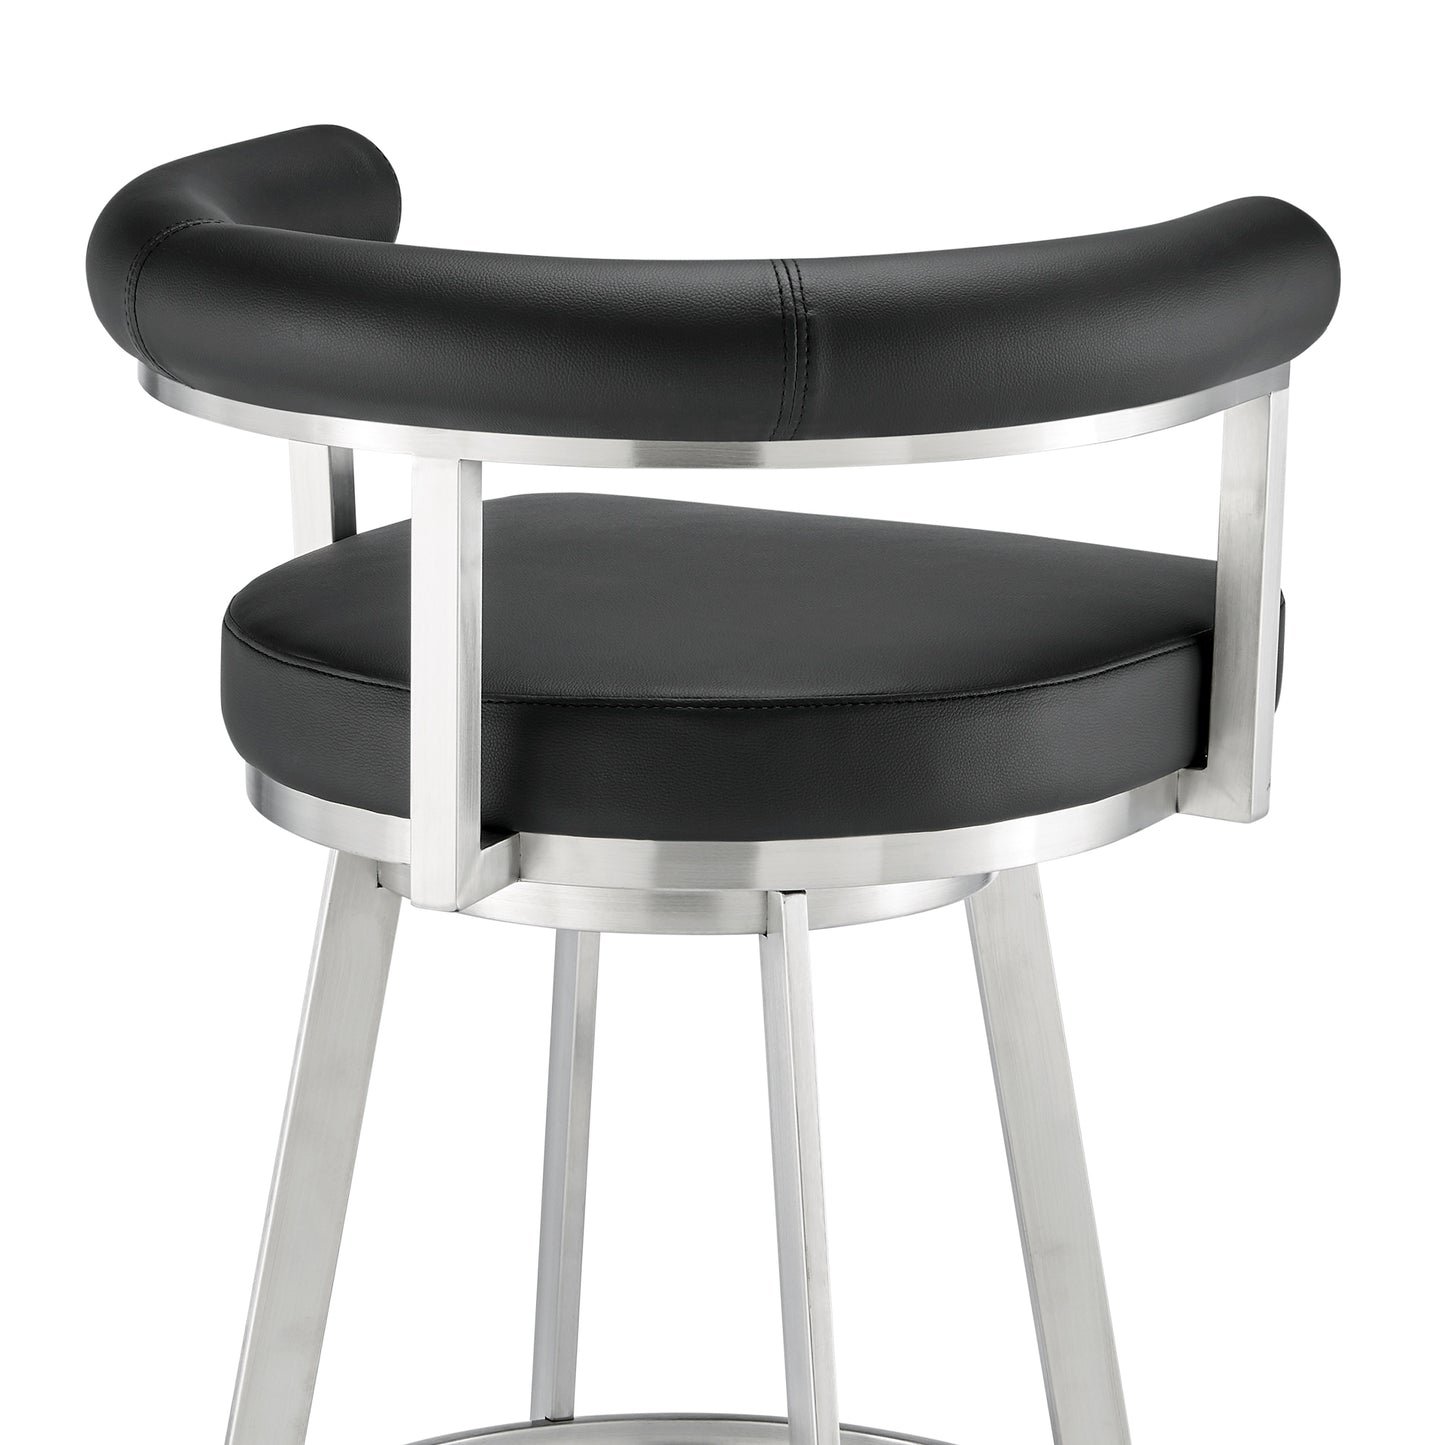 Magnolia 26" Swivel Counter Stool in Brushed Stainless Steel with Black Faux Leather